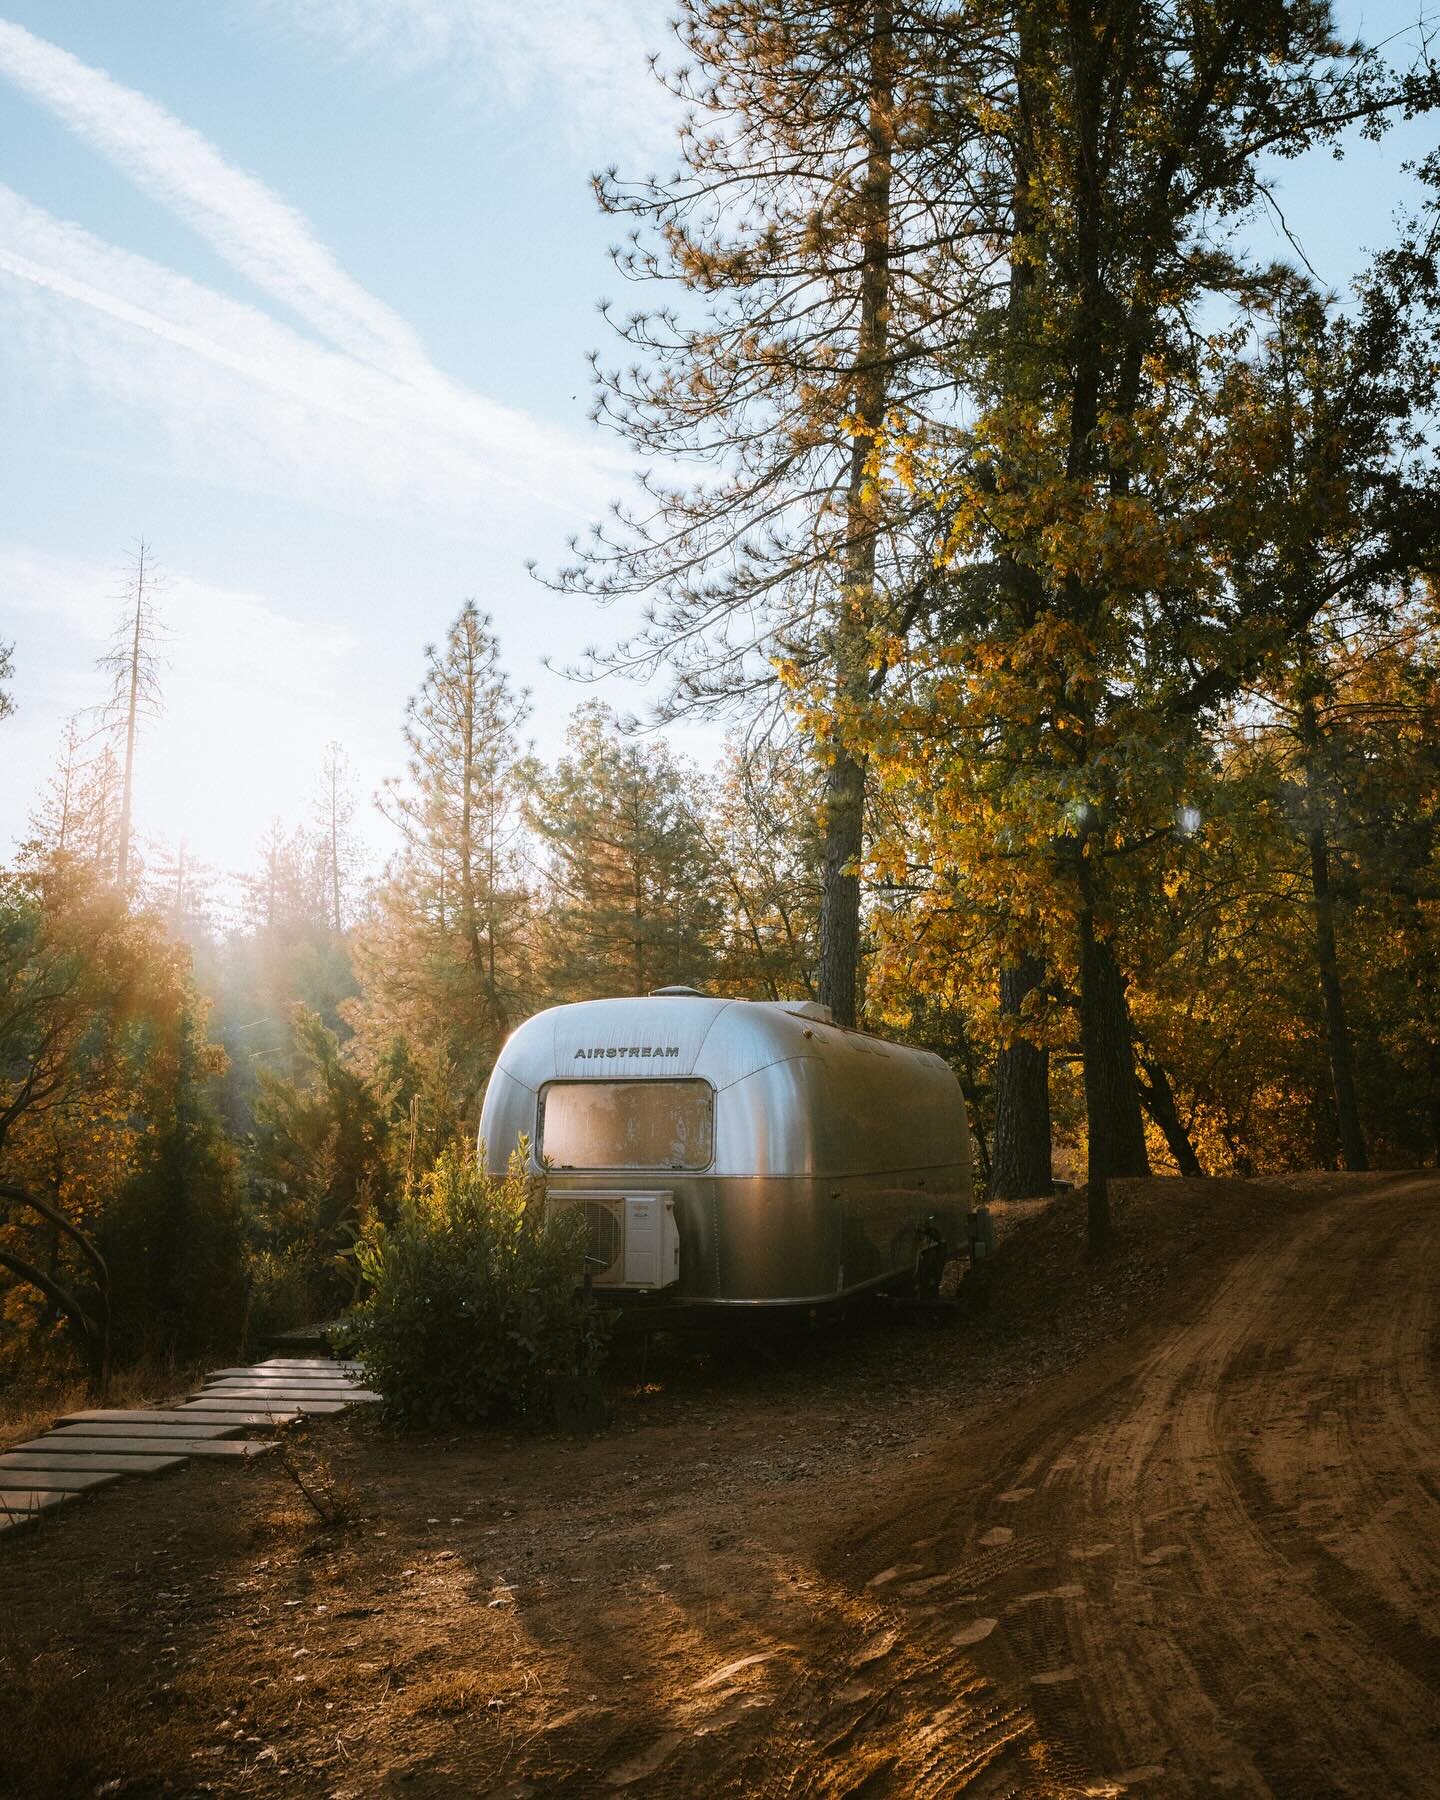 a place to call home while exploring yosemite 🌲

nestled in the trees and kept cozy in an outfitted airstream of my dreams. couldn&rsquo;t ask for more during camp @threads with the @instagram team.

would you spend a few nights in a place like this